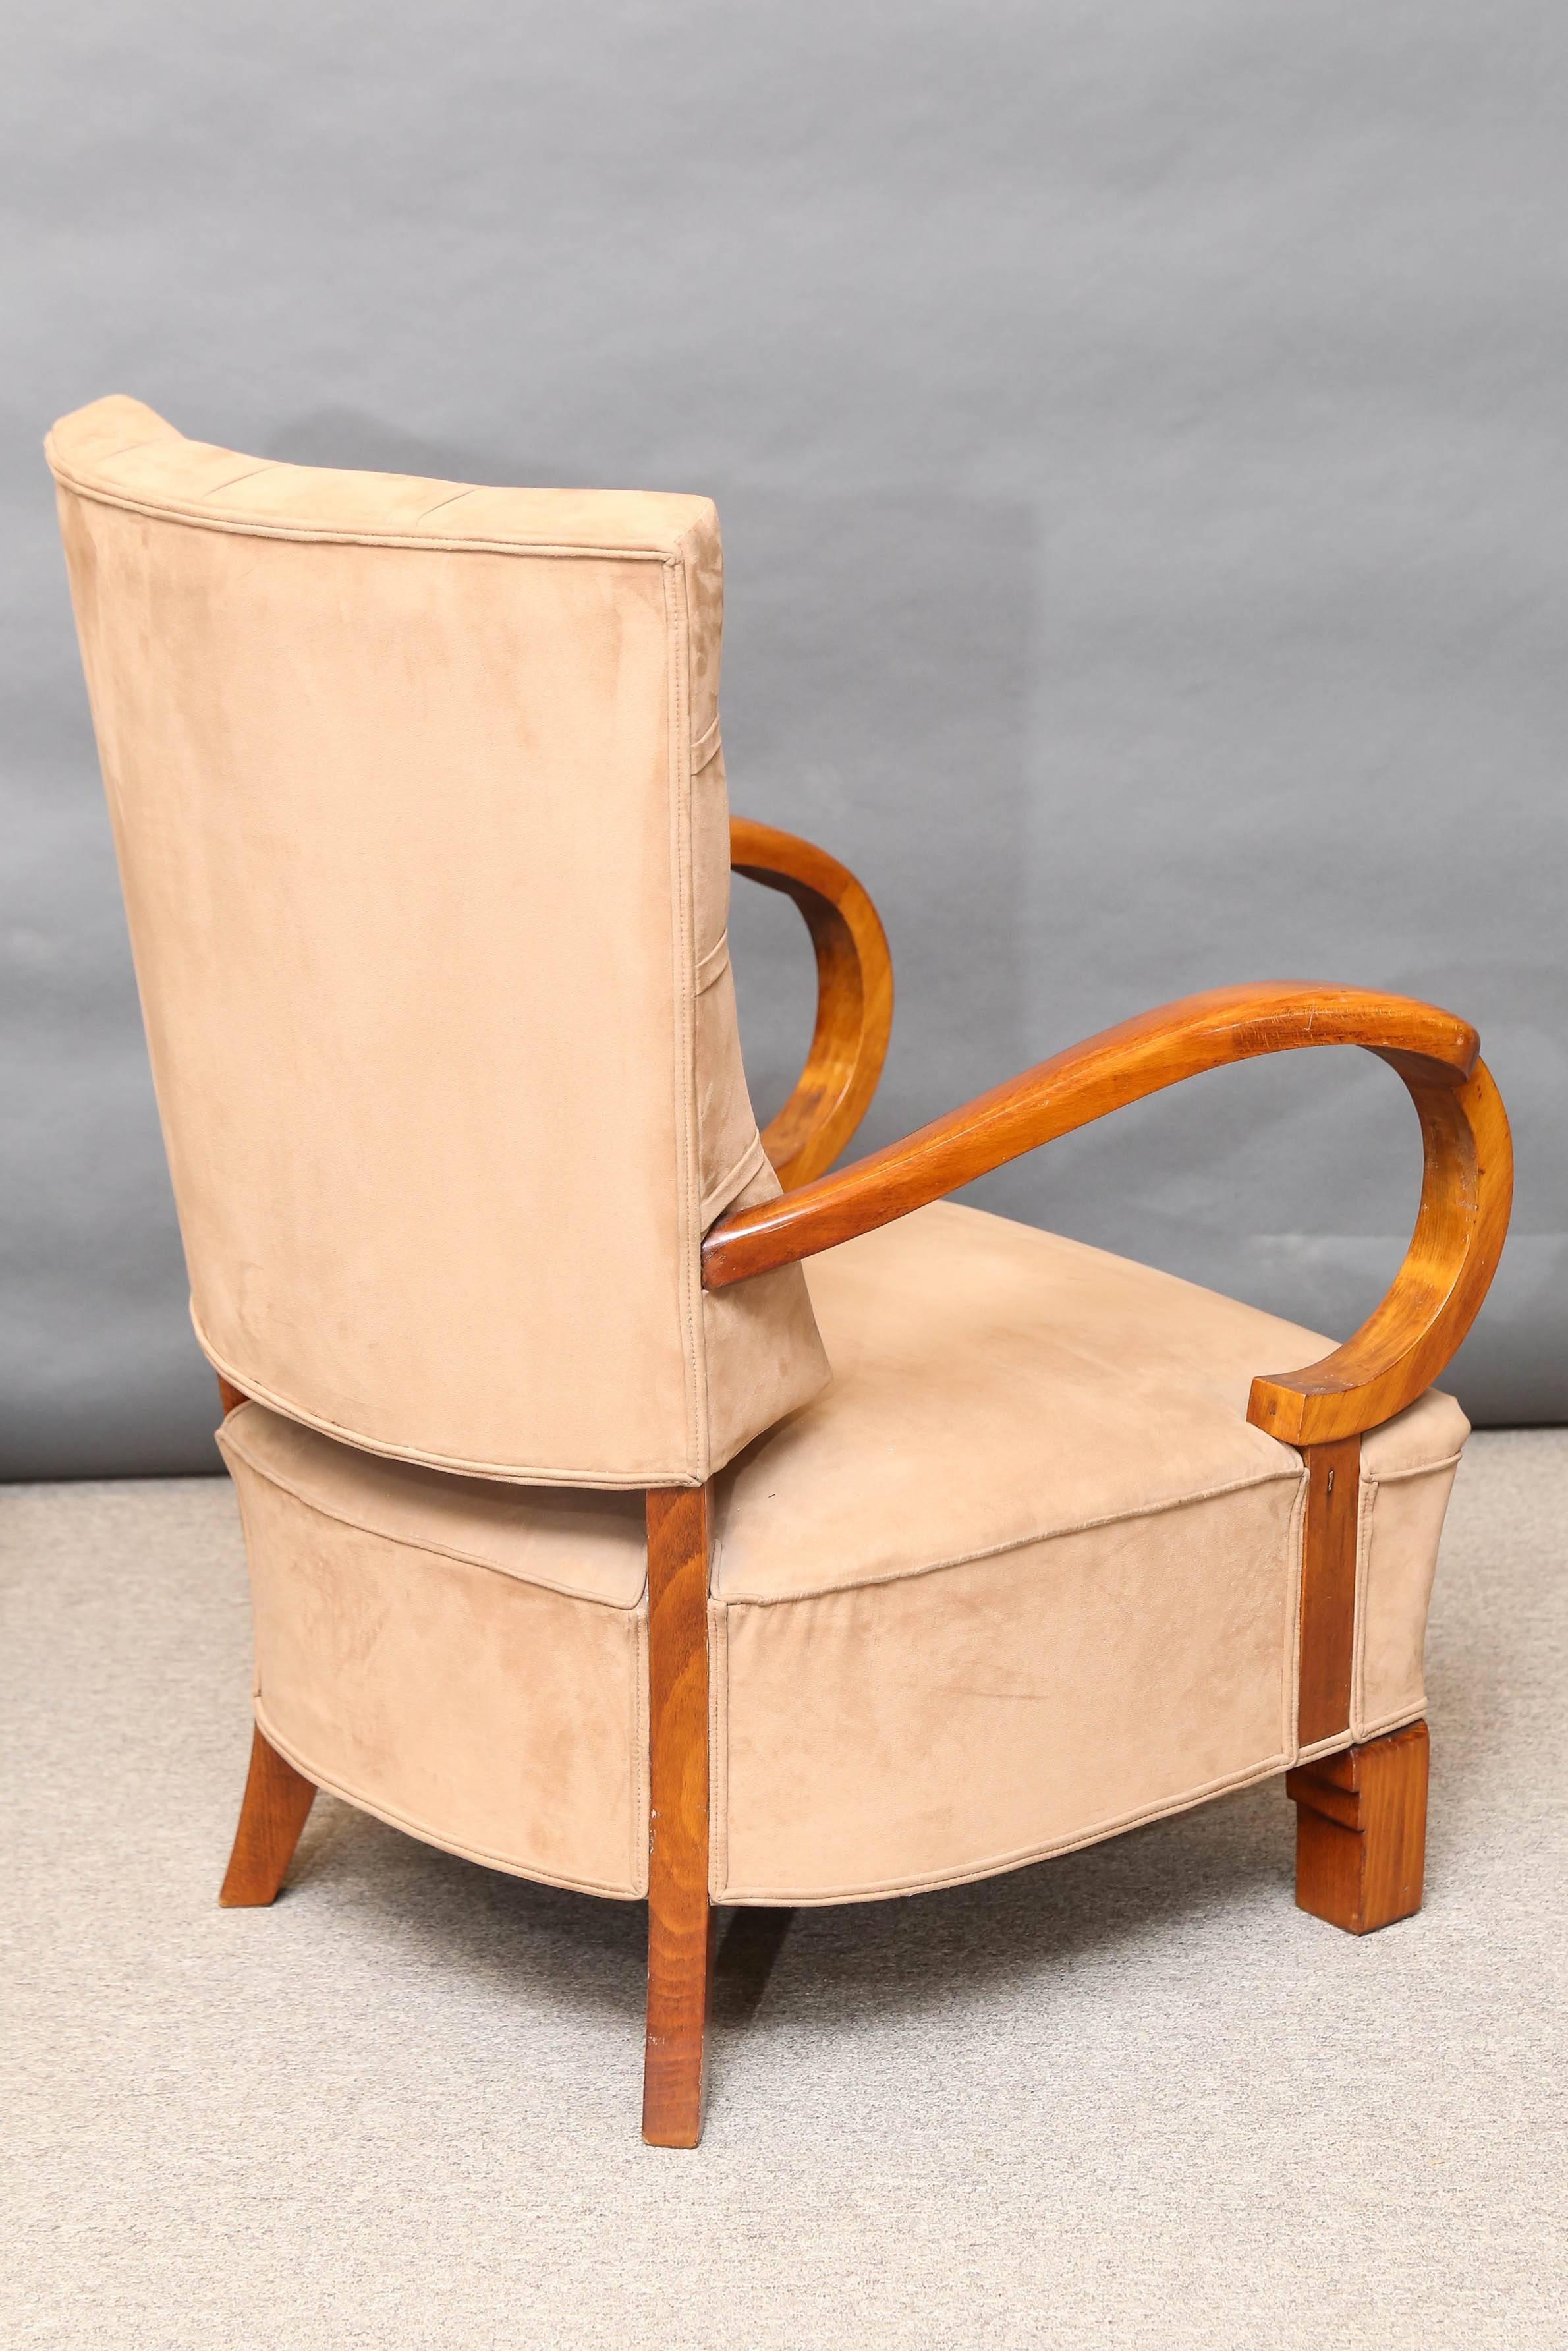 Mid-20th Century Austrian Mid-Century Chair and Foot Rest in Walnut For Sale